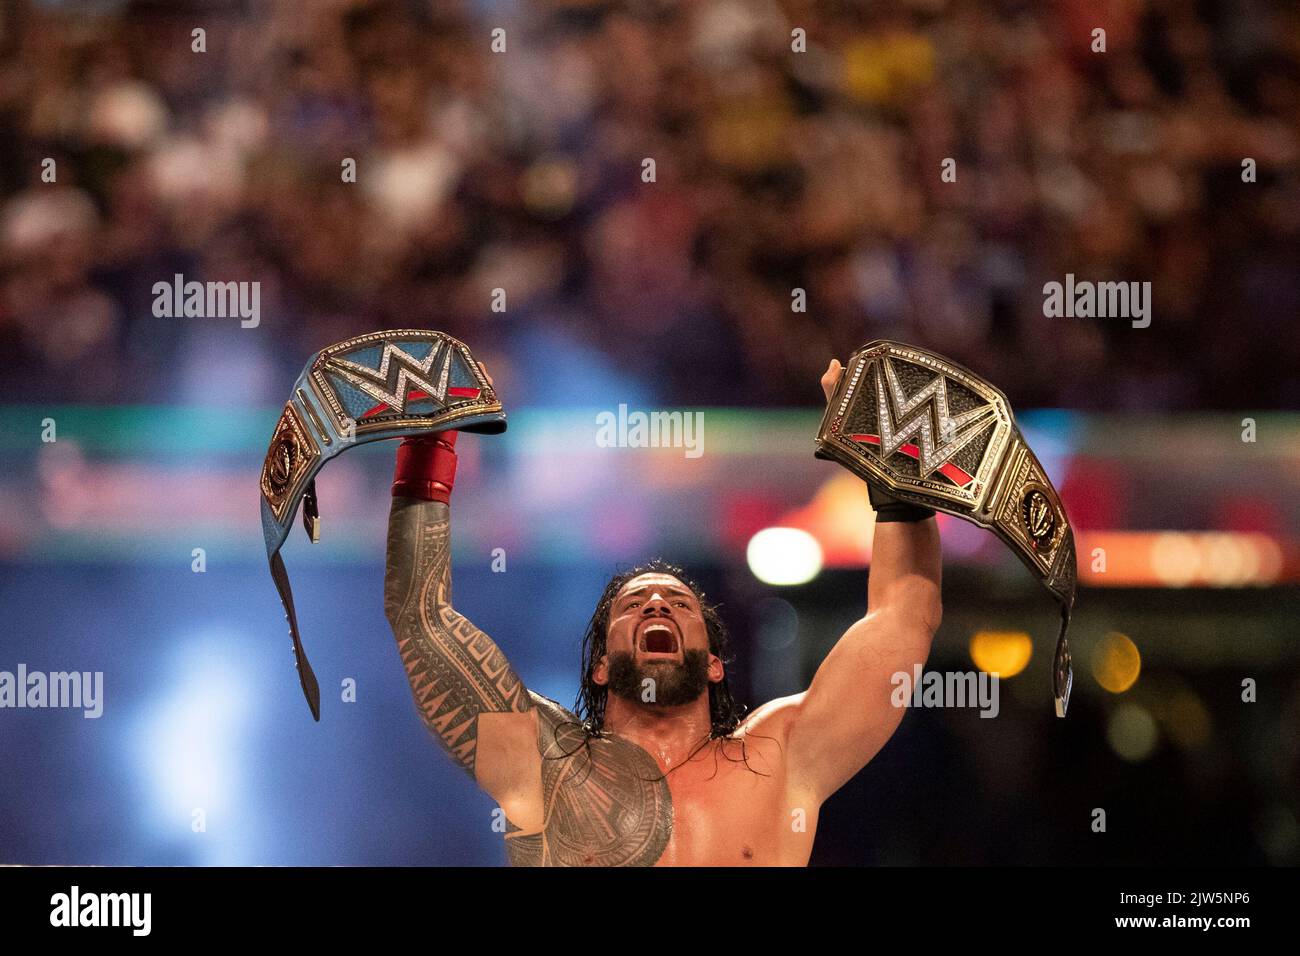 Cardiff, Wales, UK. 3rd Sep, 2022. Roman Reigns celebrates his win over Drew McIntyre during the WWE ‘Clash At The Castle' wrestling event at the Principality Stadium in Cardiff. Credit: Mark Hawkins/Alamy Live News Stock Photo